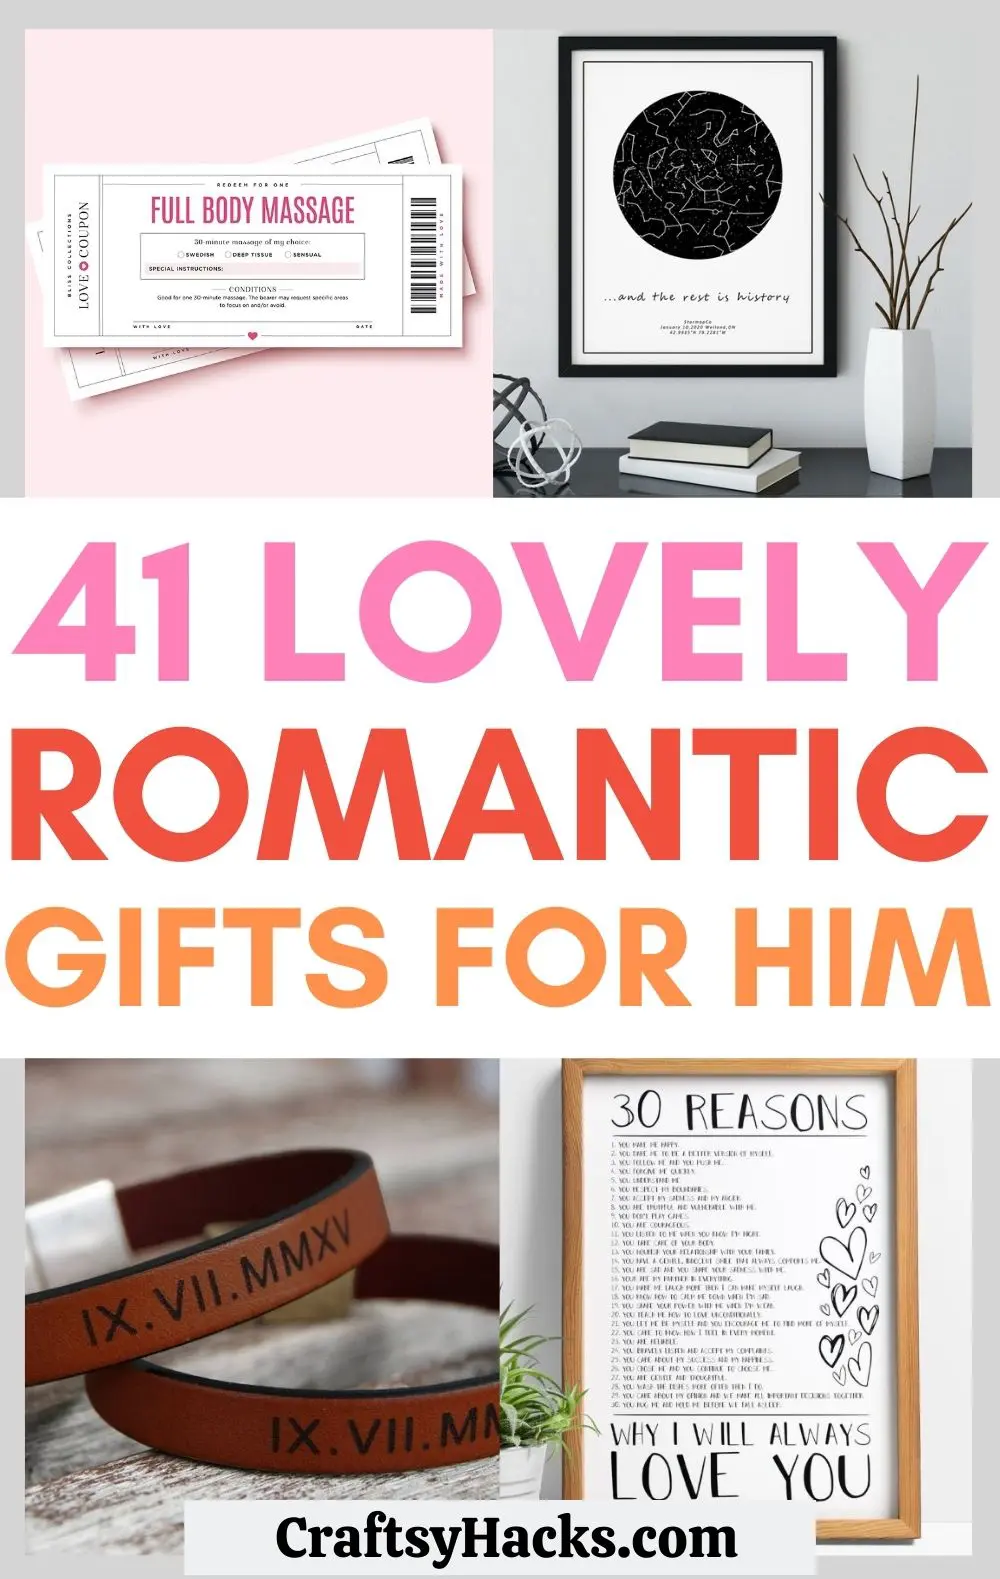 40 DIY Gifts for Men  Creative Gift Ideas to Make for Guys  YouTube